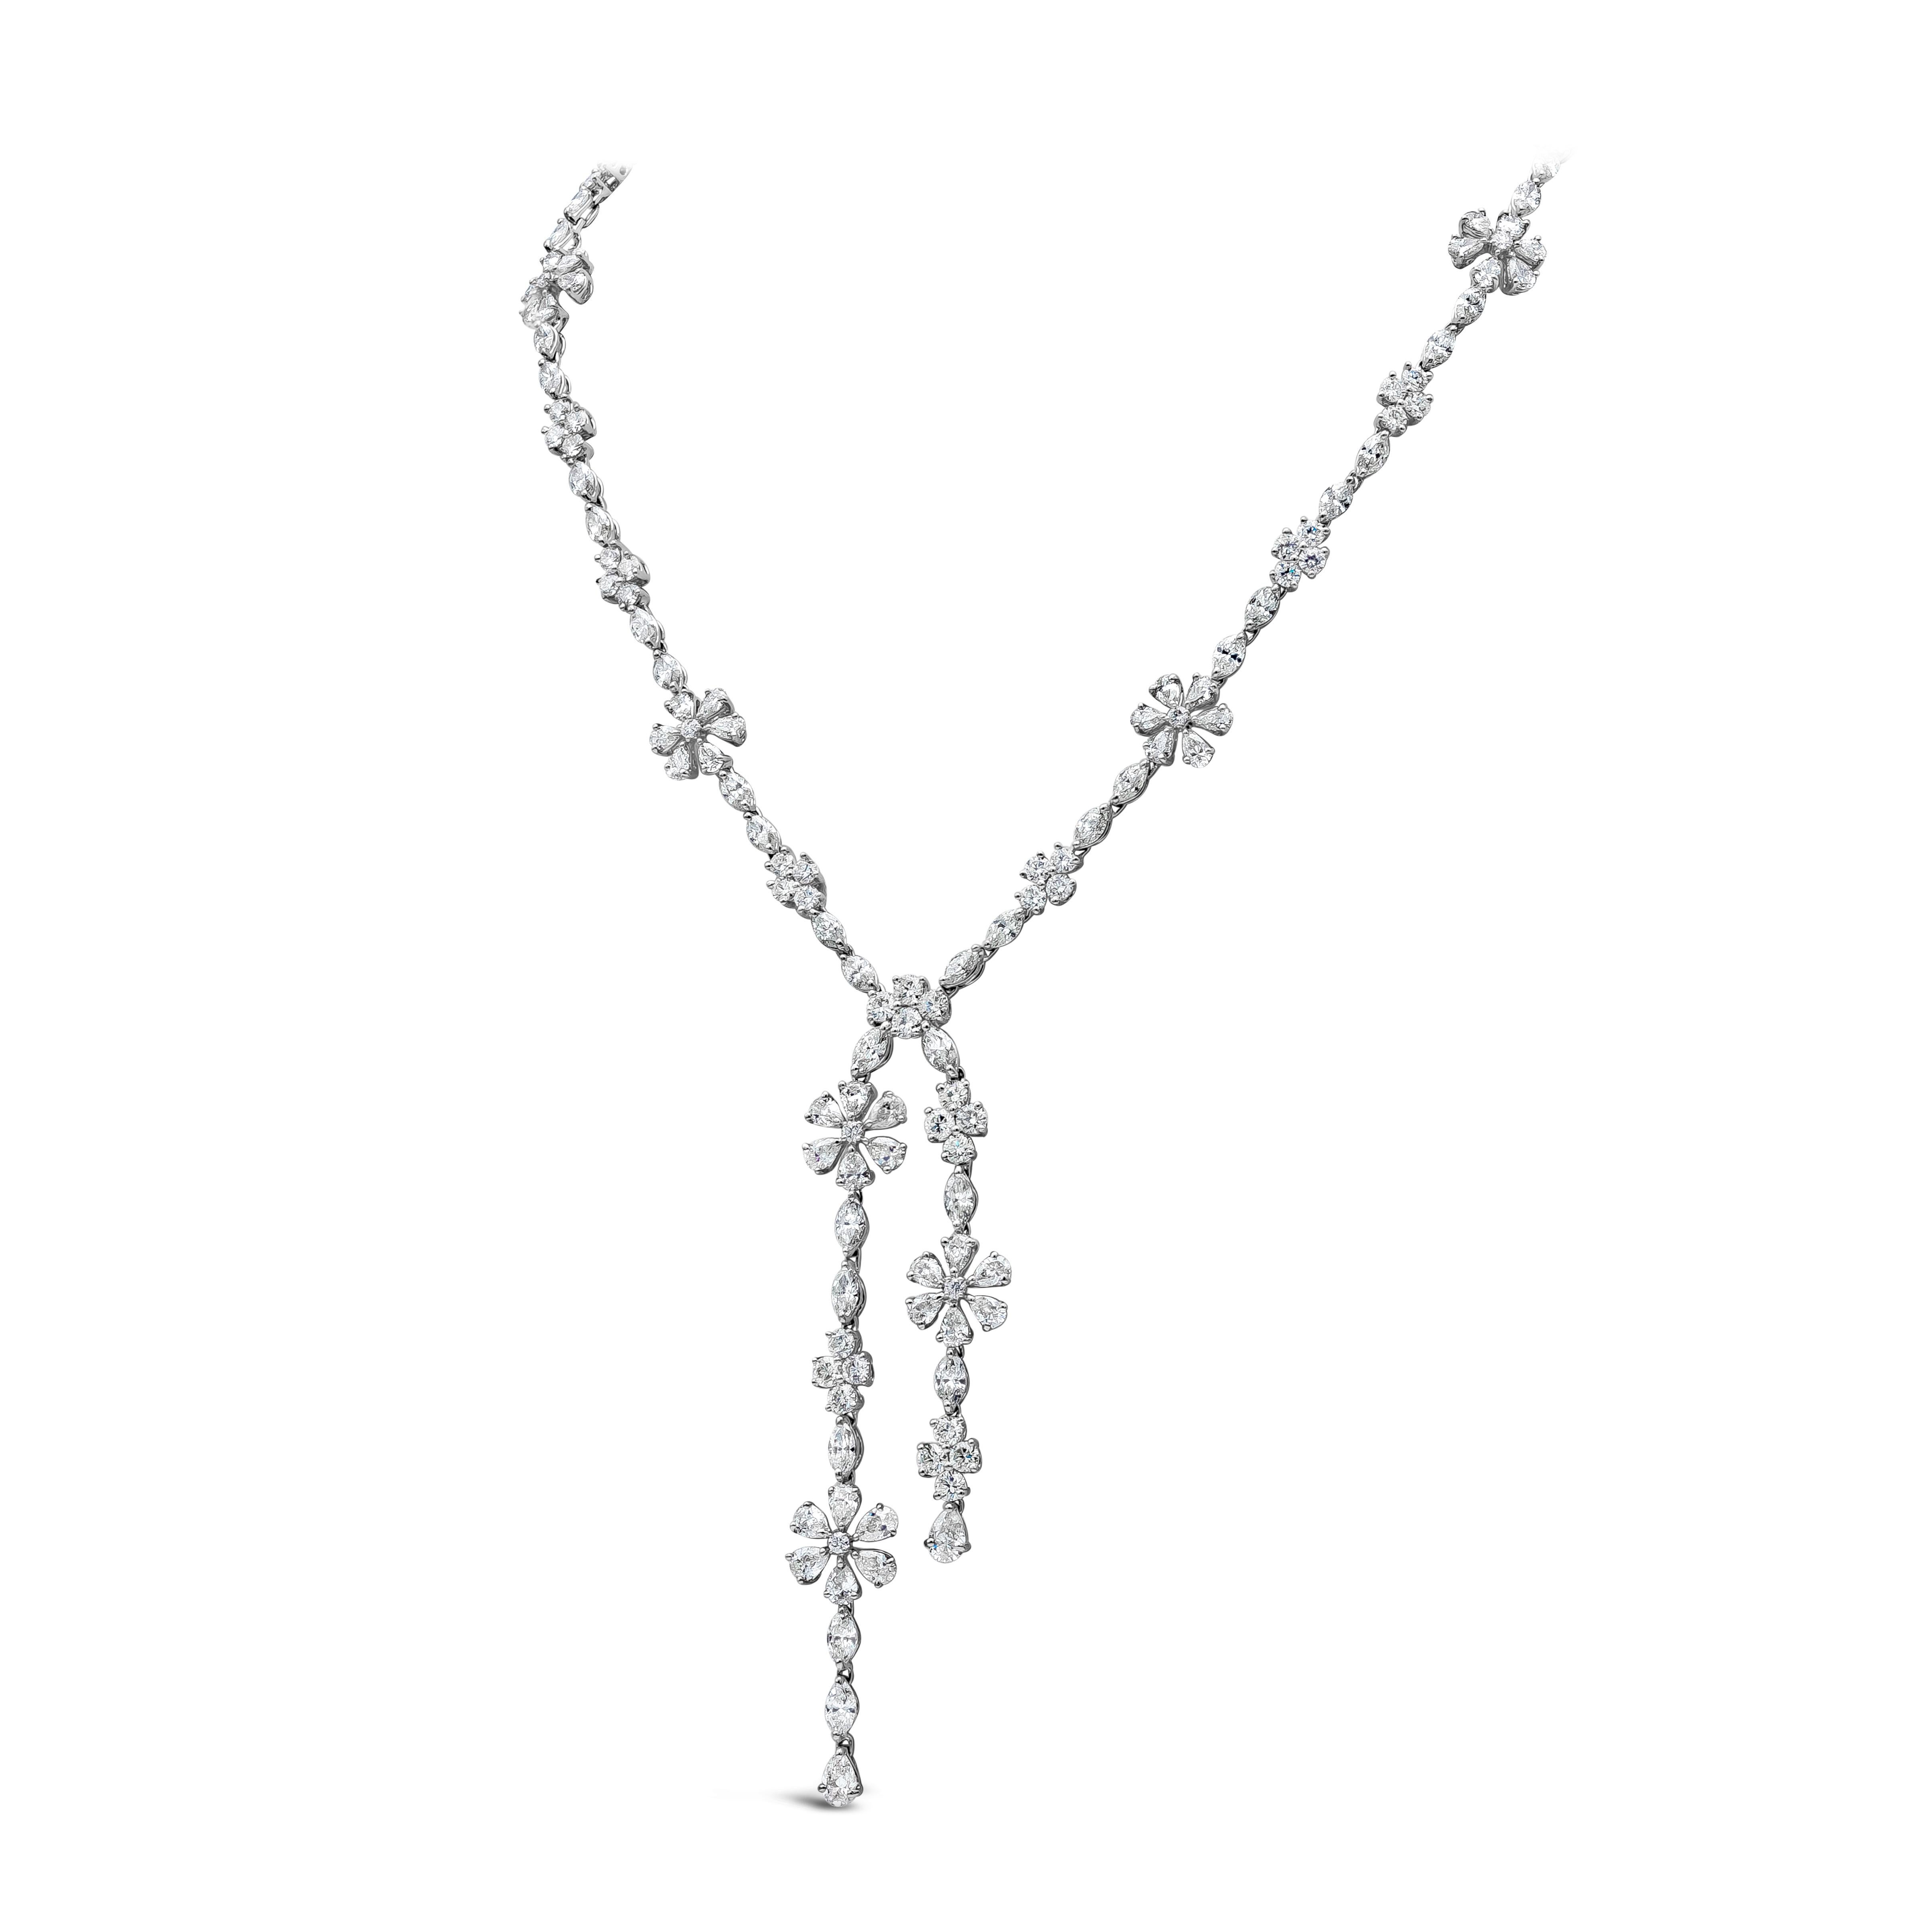 An elegant mixed-cut diamond necklace showcasing 83 round diamonds weighing 7.41 carats. 49 marquise cut diamonds weighing 9.99 carats, and 44 pear shape diamonds weighing 7.37 carats, with a total weight of 24.77 carats. Flower-Motif inspired on a